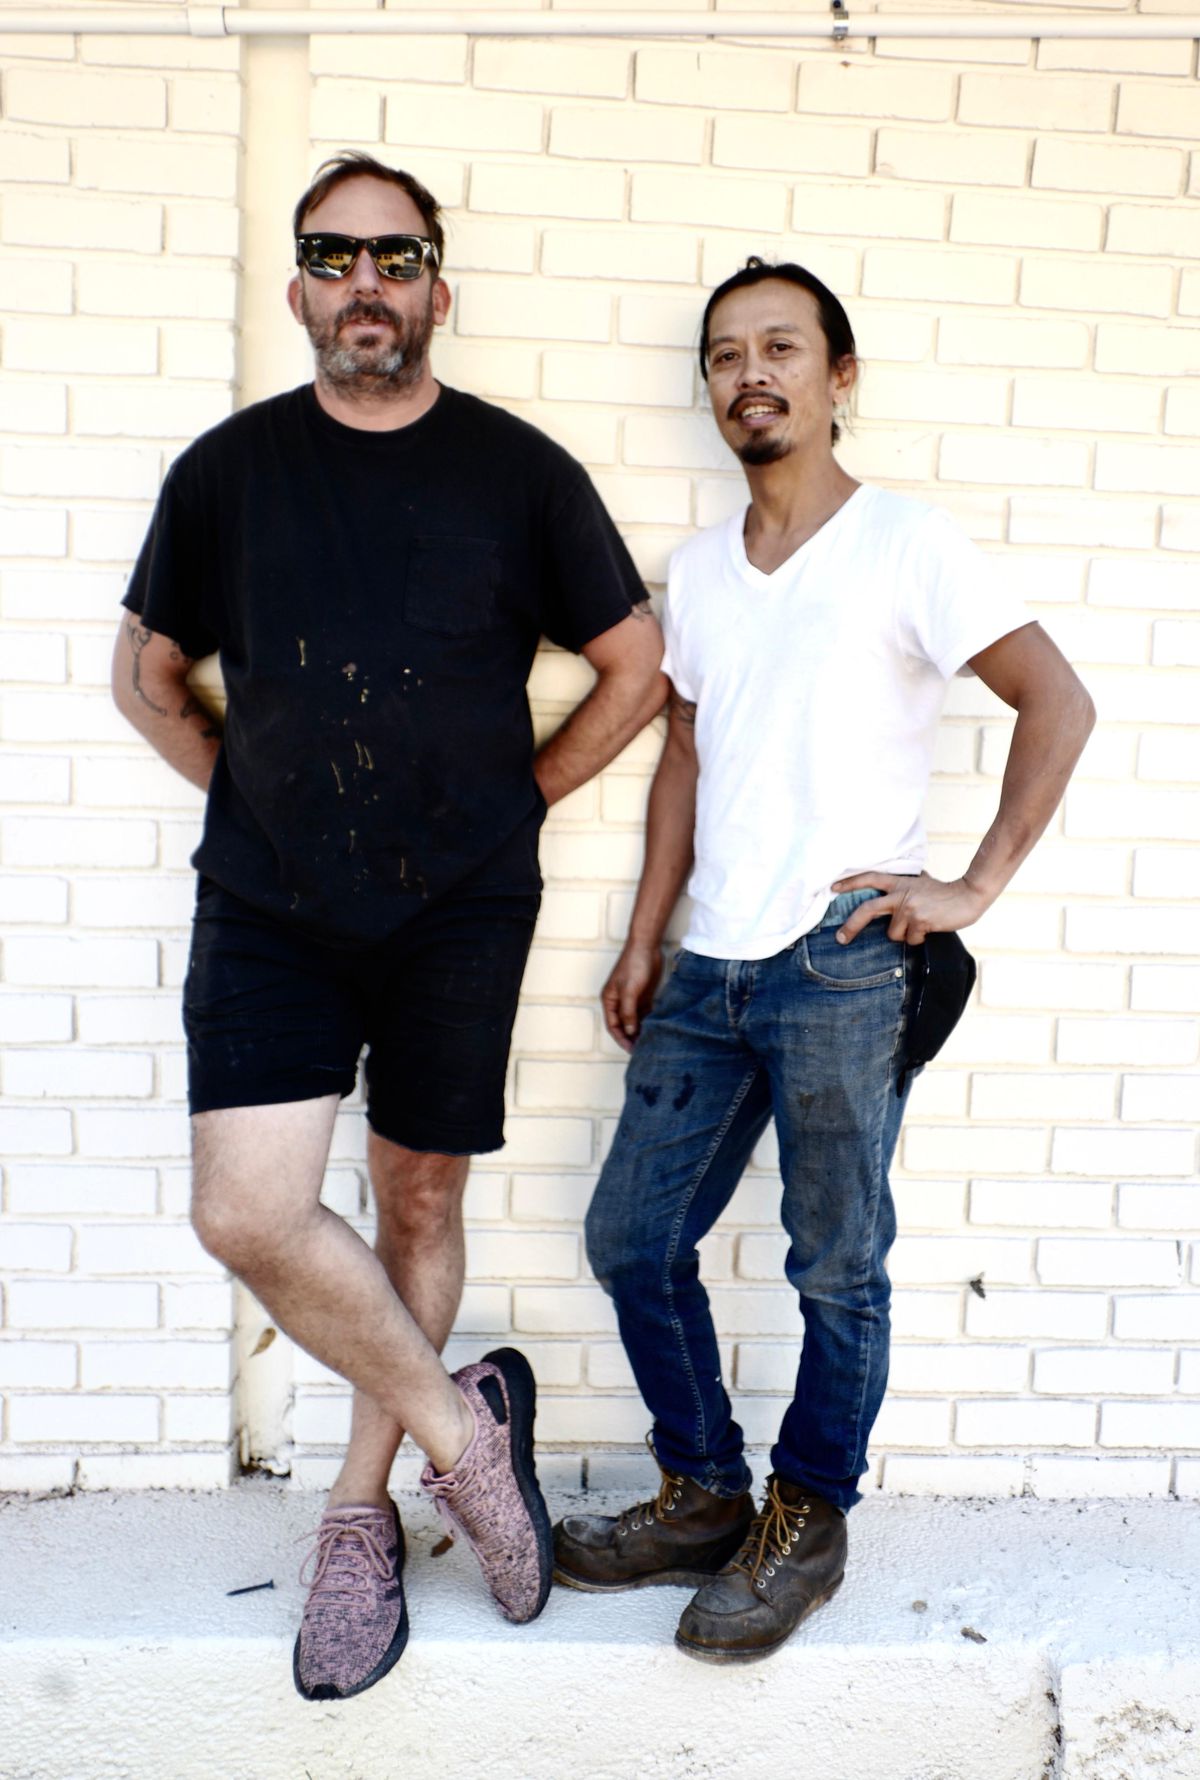 Skip Englebrecht in a black t-shirt and black shorts leans against a white brick wall next to Chief Nhan Le in a white v-neck t-shirt, jeans and work boots